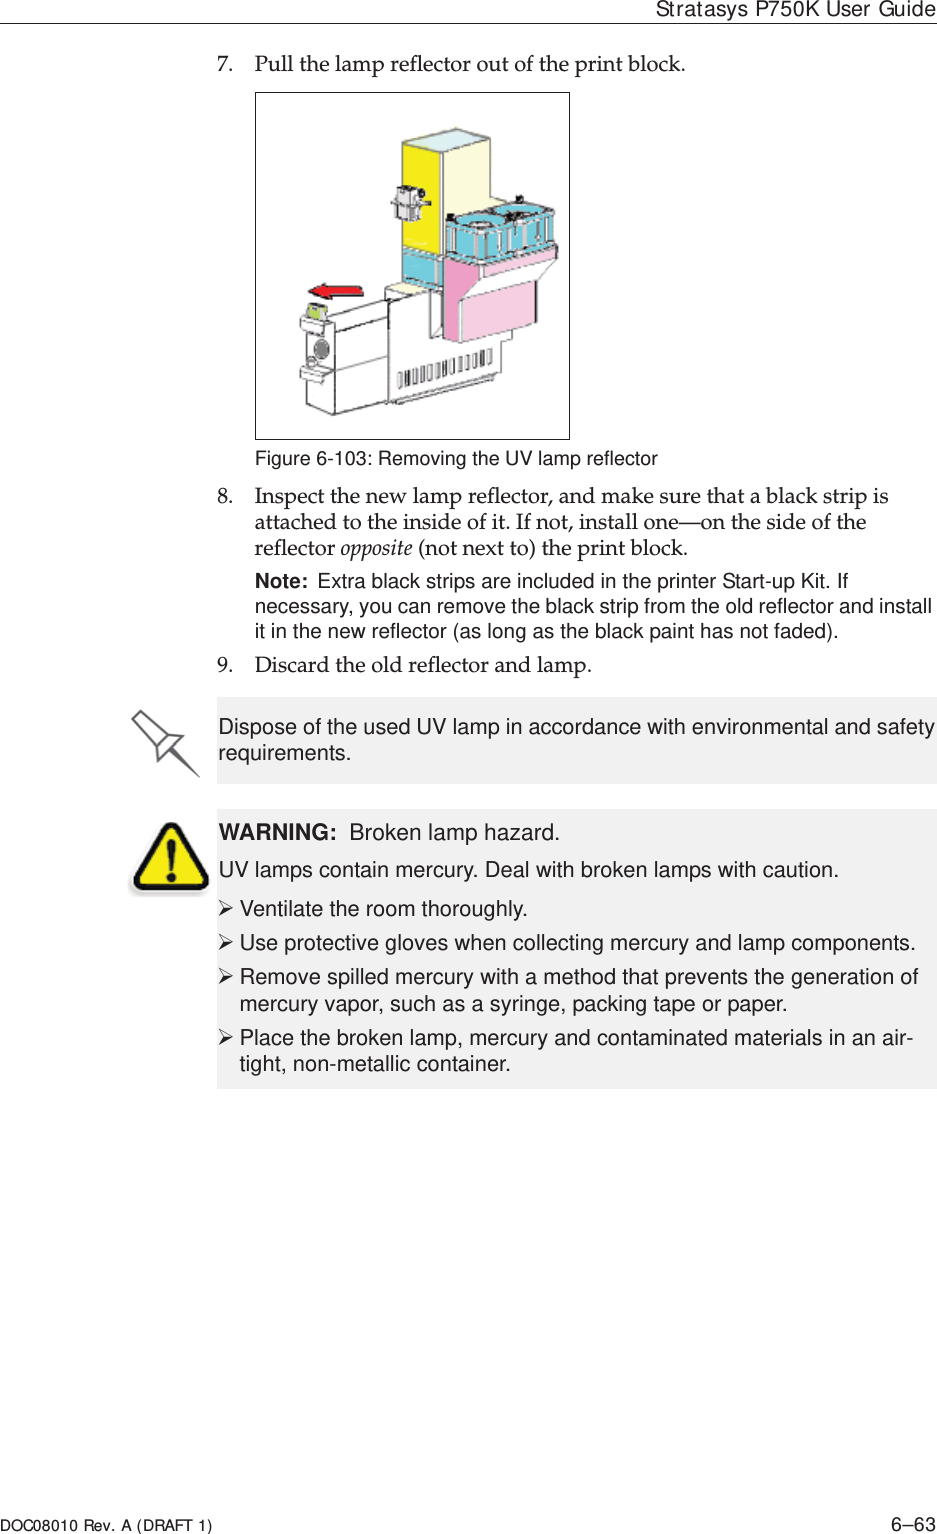 DOC08010 Rev. A (DRAFT 1) 6–63Stratasys P750K User Guide7. Pullȱtheȱlampȱreflectorȱoutȱofȱtheȱprintȱblock.Figure 6-103: Removing the UV lamp reflector8. Inspectȱtheȱnewȱlampȱreflector,ȱandȱmakeȱsureȱthatȱaȱblackȱstripȱisȱattachedȱtoȱtheȱinsideȱofȱit.ȱIfȱnot,ȱinstallȱone—onȱtheȱsideȱofȱtheȱreflectorȱoppositeȱ(notȱnextȱto)ȱtheȱprintȱblock.Note: Extra black strips are included in the printer Start-up Kit. If necessary, you can remove the black strip from the old reflector and install it in the new reflector (as long as the black paint has not faded).9. Discardȱtheȱoldȱreflectorȱandȱlamp.Dispose of the used UV lamp in accordance with environmental and safety requirements.WARNING:  Broken lamp hazard.UV lamps contain mercury. Deal with broken lamps with caution.¾Ventilate the room thoroughly.¾Use protective gloves when collecting mercury and lamp components.¾Remove spilled mercury with a method that prevents the generation of mercury vapor, such as a syringe, packing tape or paper. ¾Place the broken lamp, mercury and contaminated materials in an air-tight, non-metallic container. 